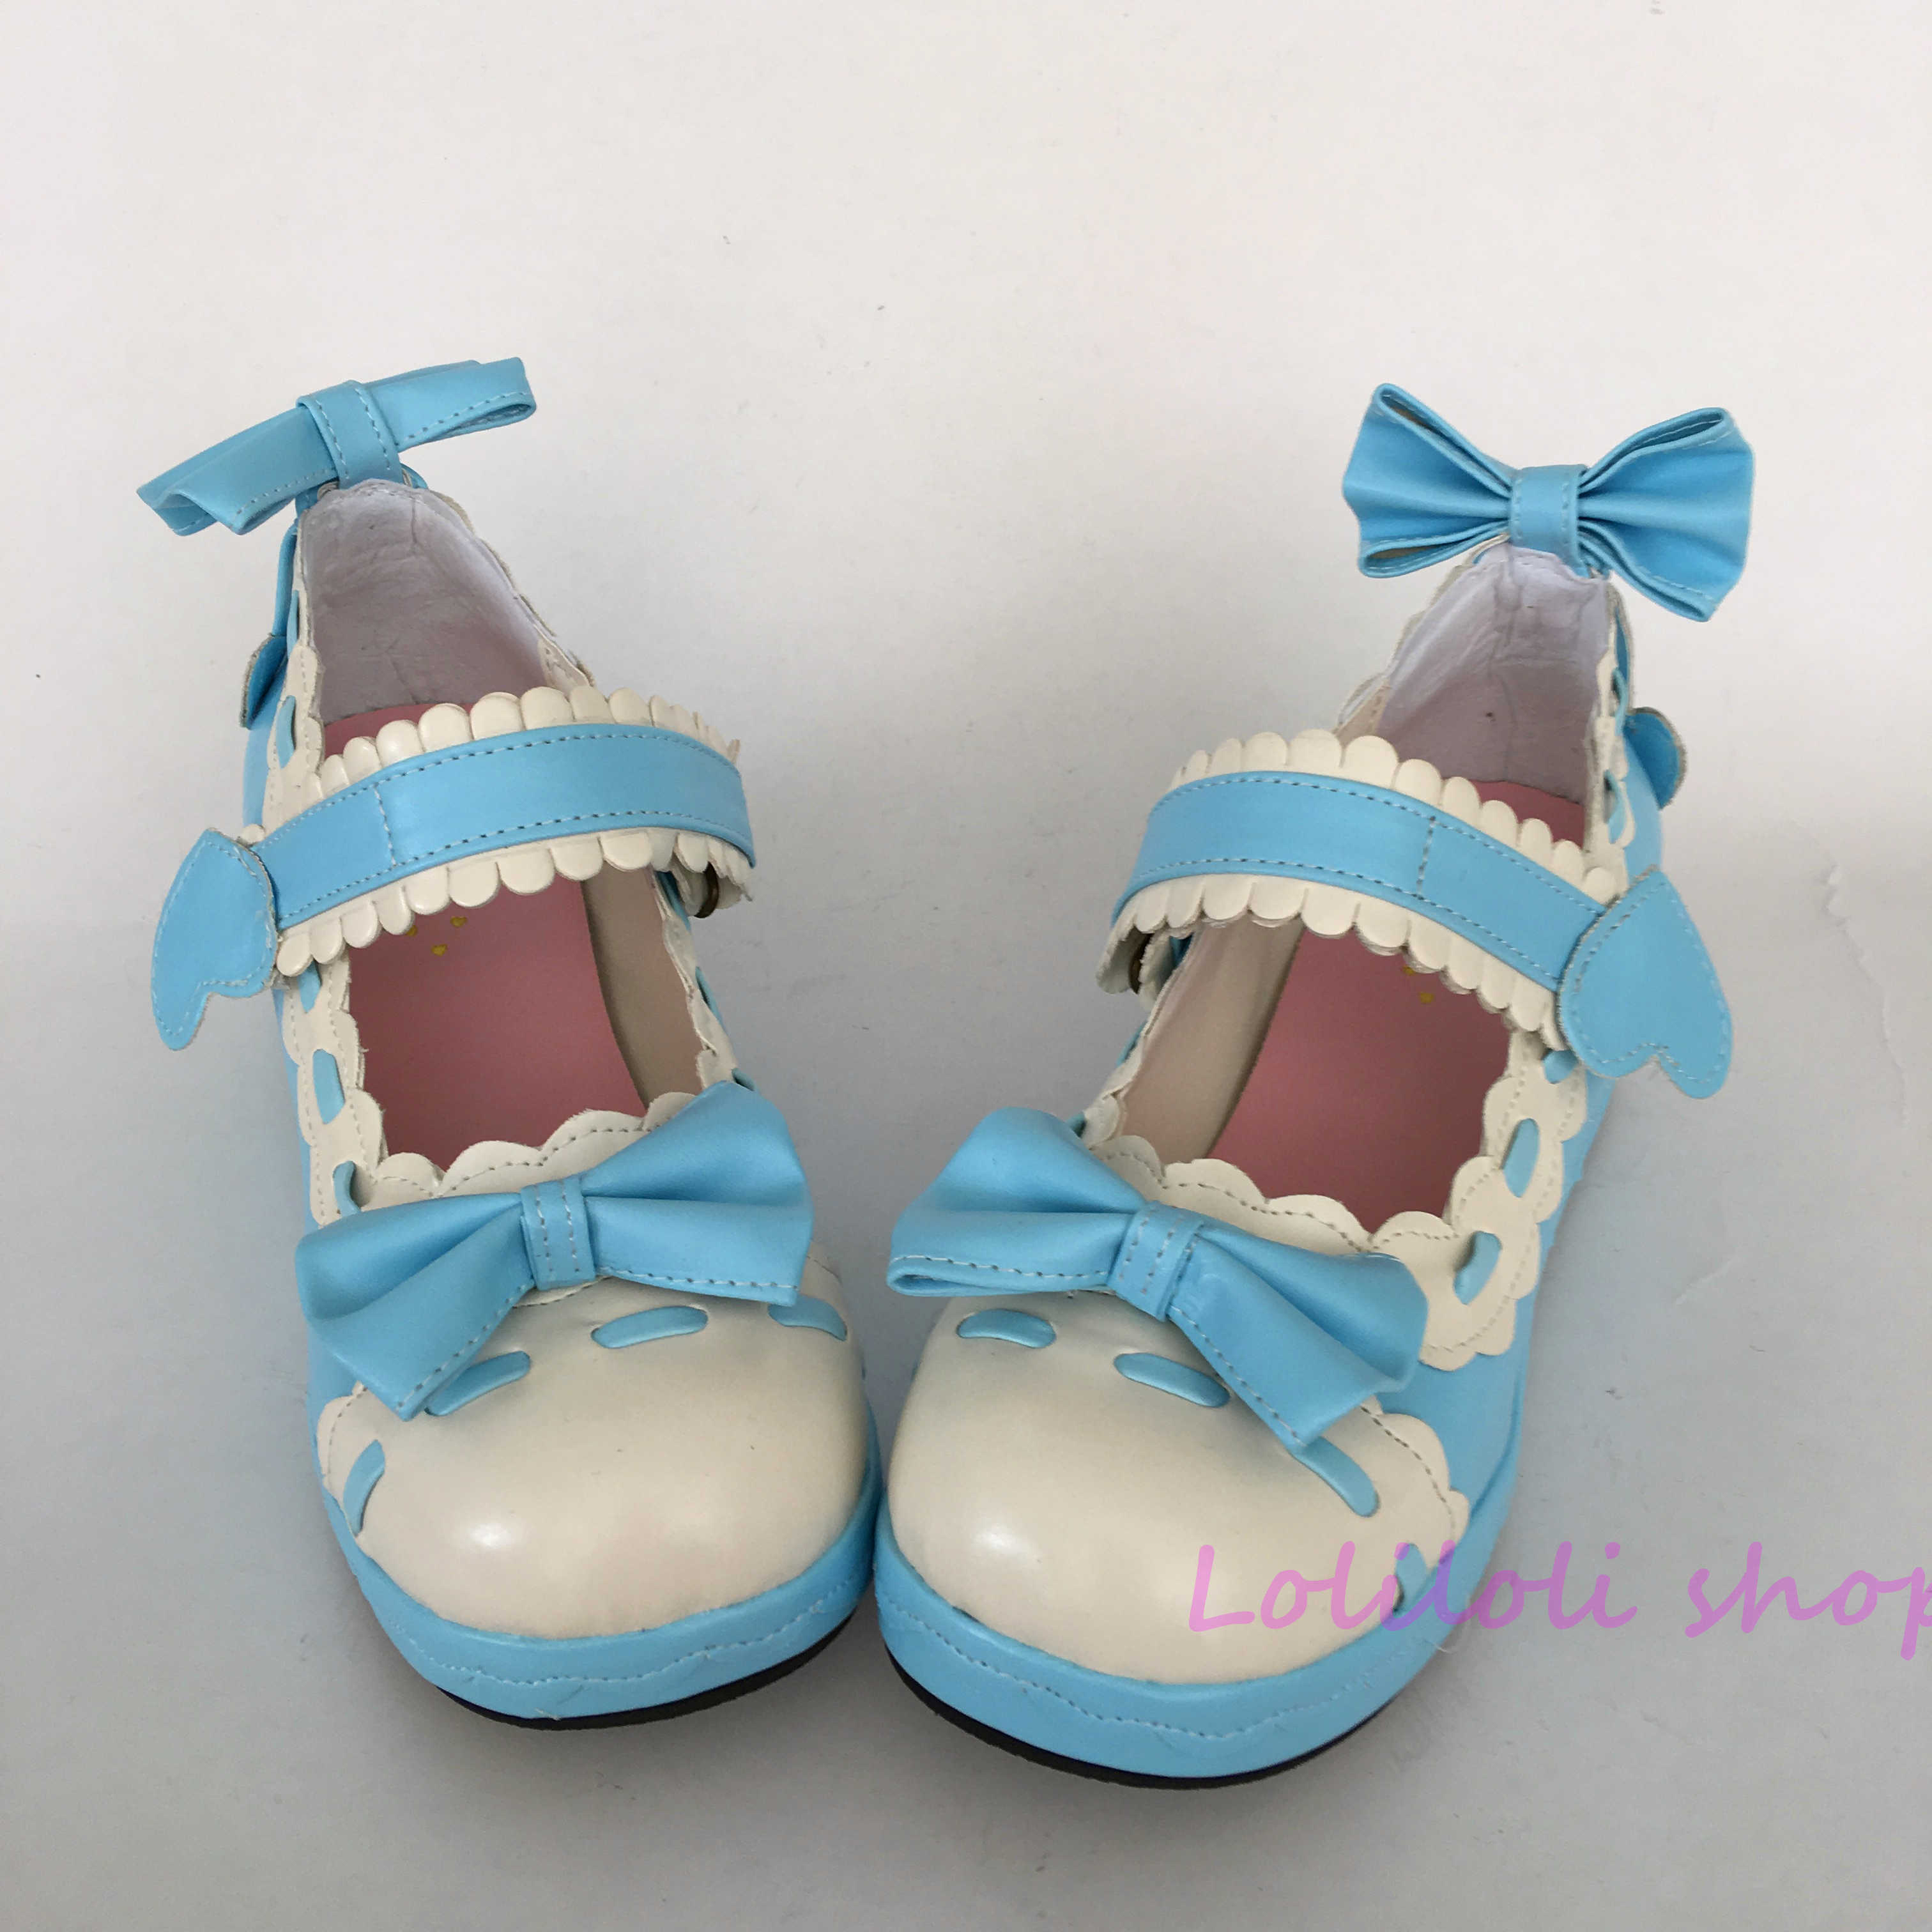 Princess sweet blue and white lolita shoes Big shoes, special shoes custom suede shoes Lolita cake customized Lace Bow Shoes1241